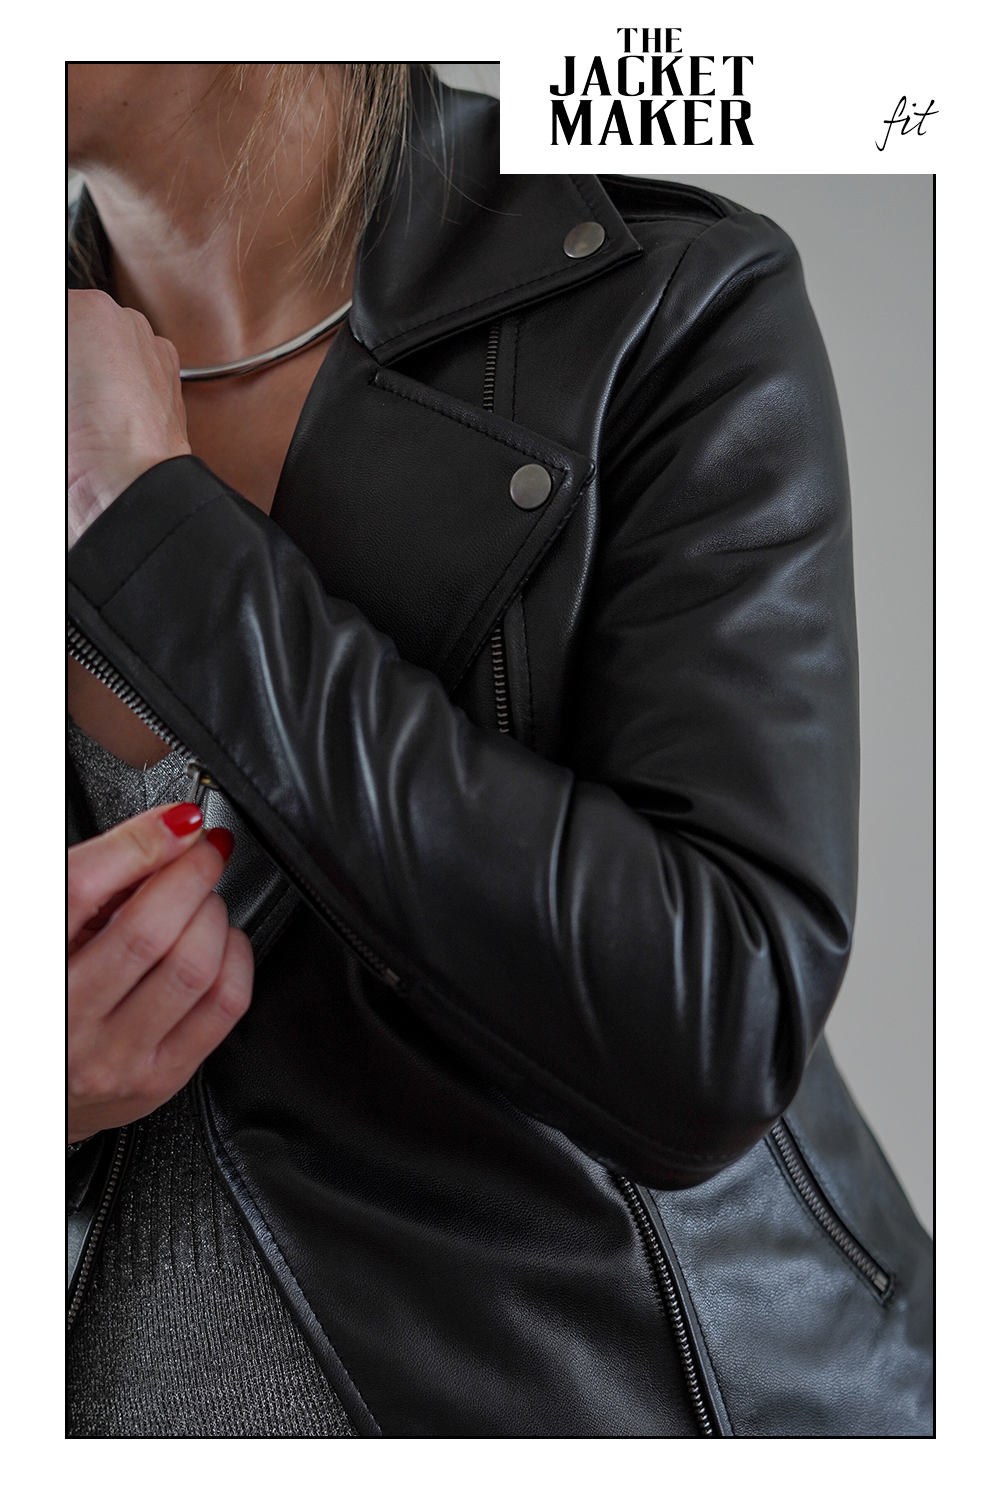  Jessica Ashley shows detailing and fit in The Jacket Maker’s Flashback Jacket in size XS | Womens Leather Jackets | Best leather jackets for women | Leather Jacket Review 